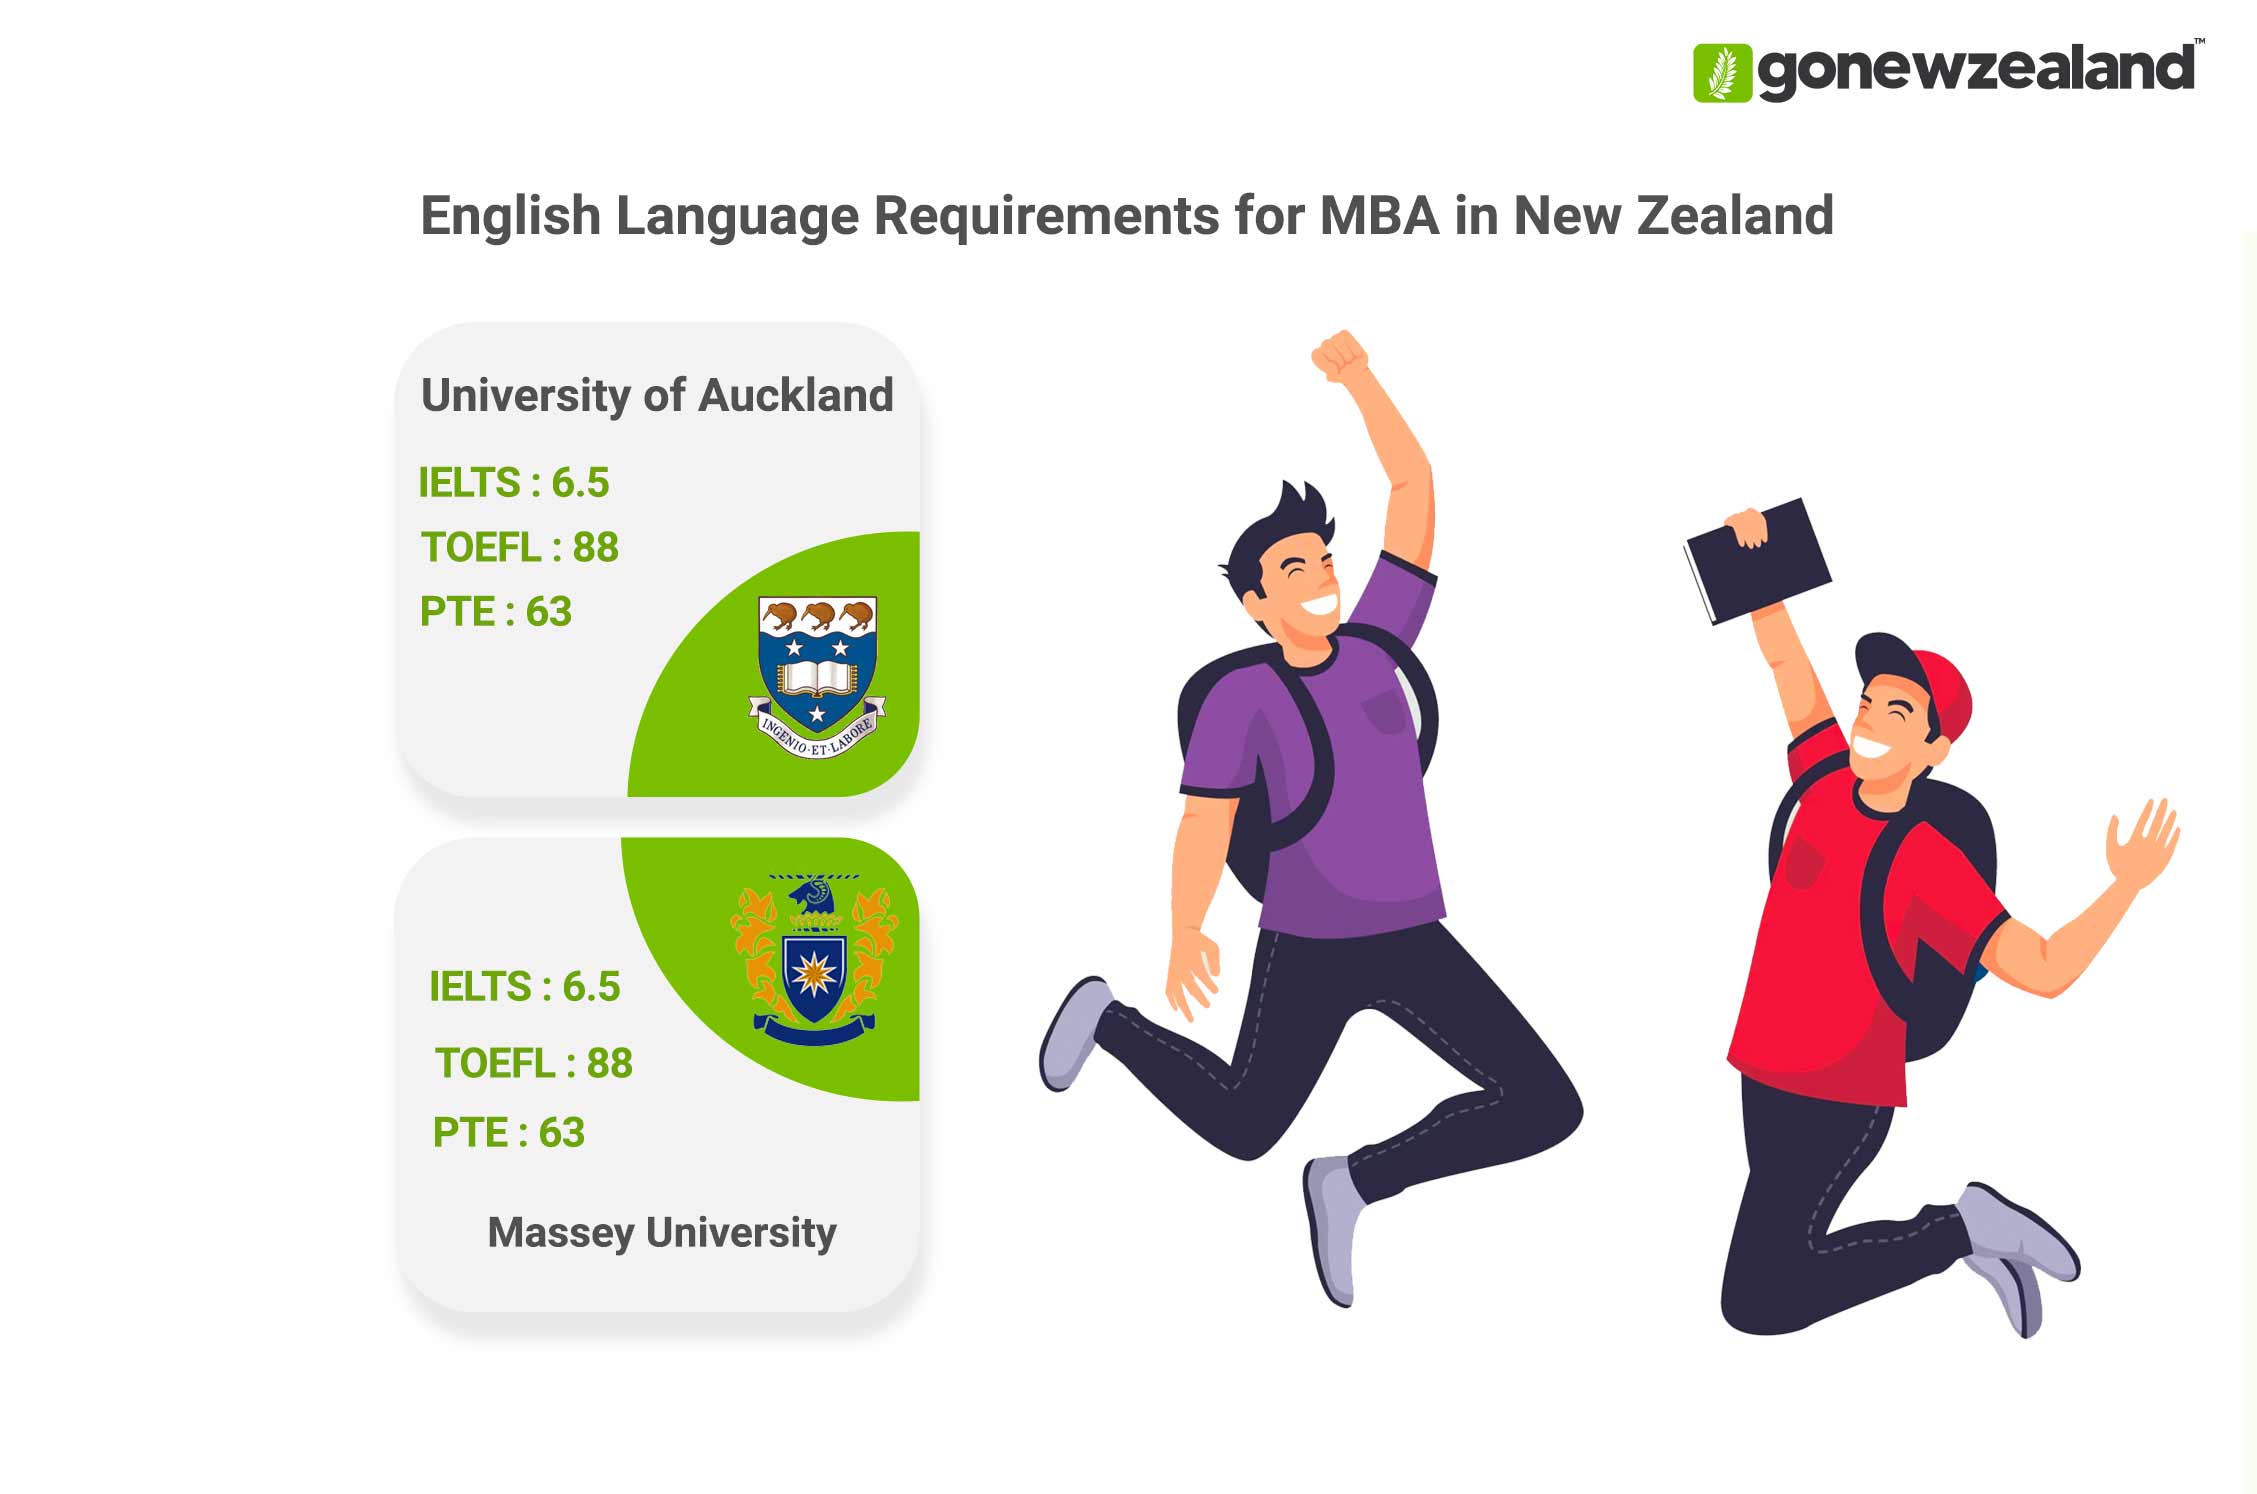 MBA in New Zealand English Language Requirements